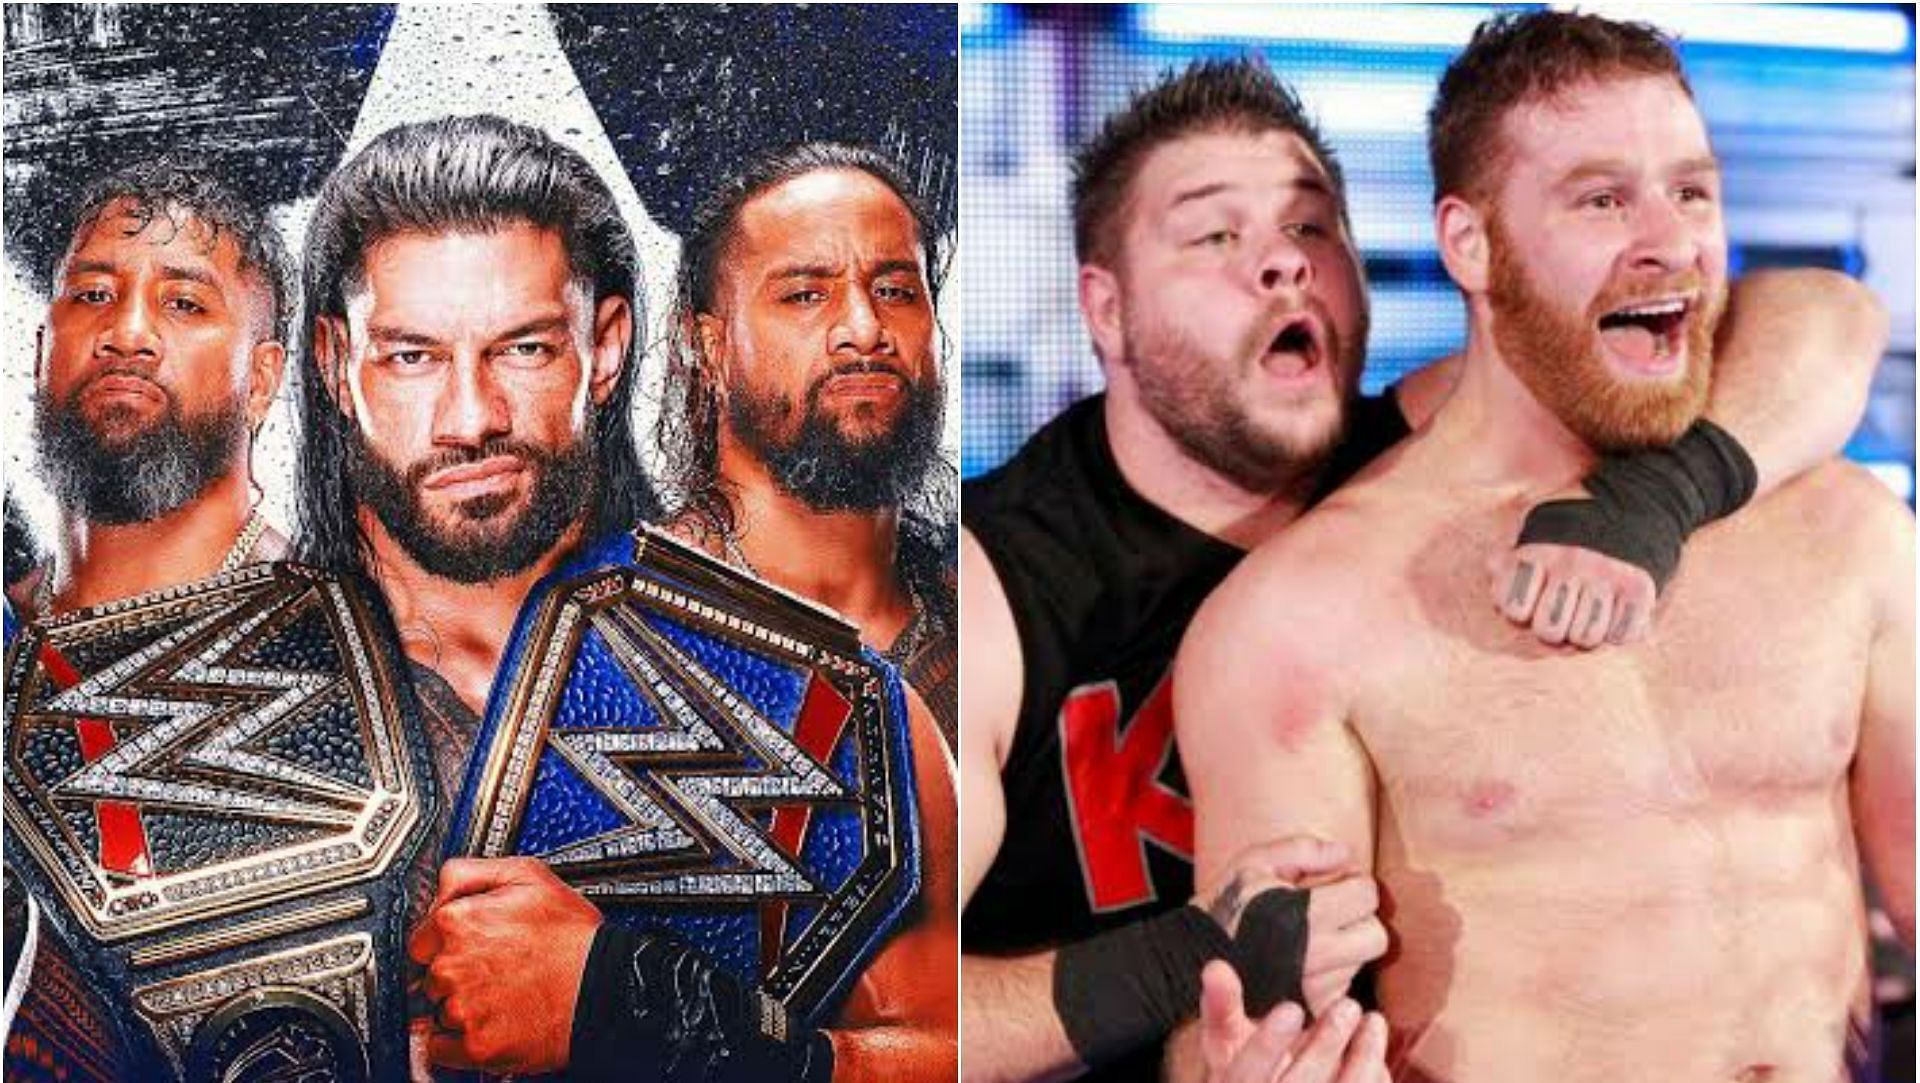 3 interesting things that could happen on the episode of WWE